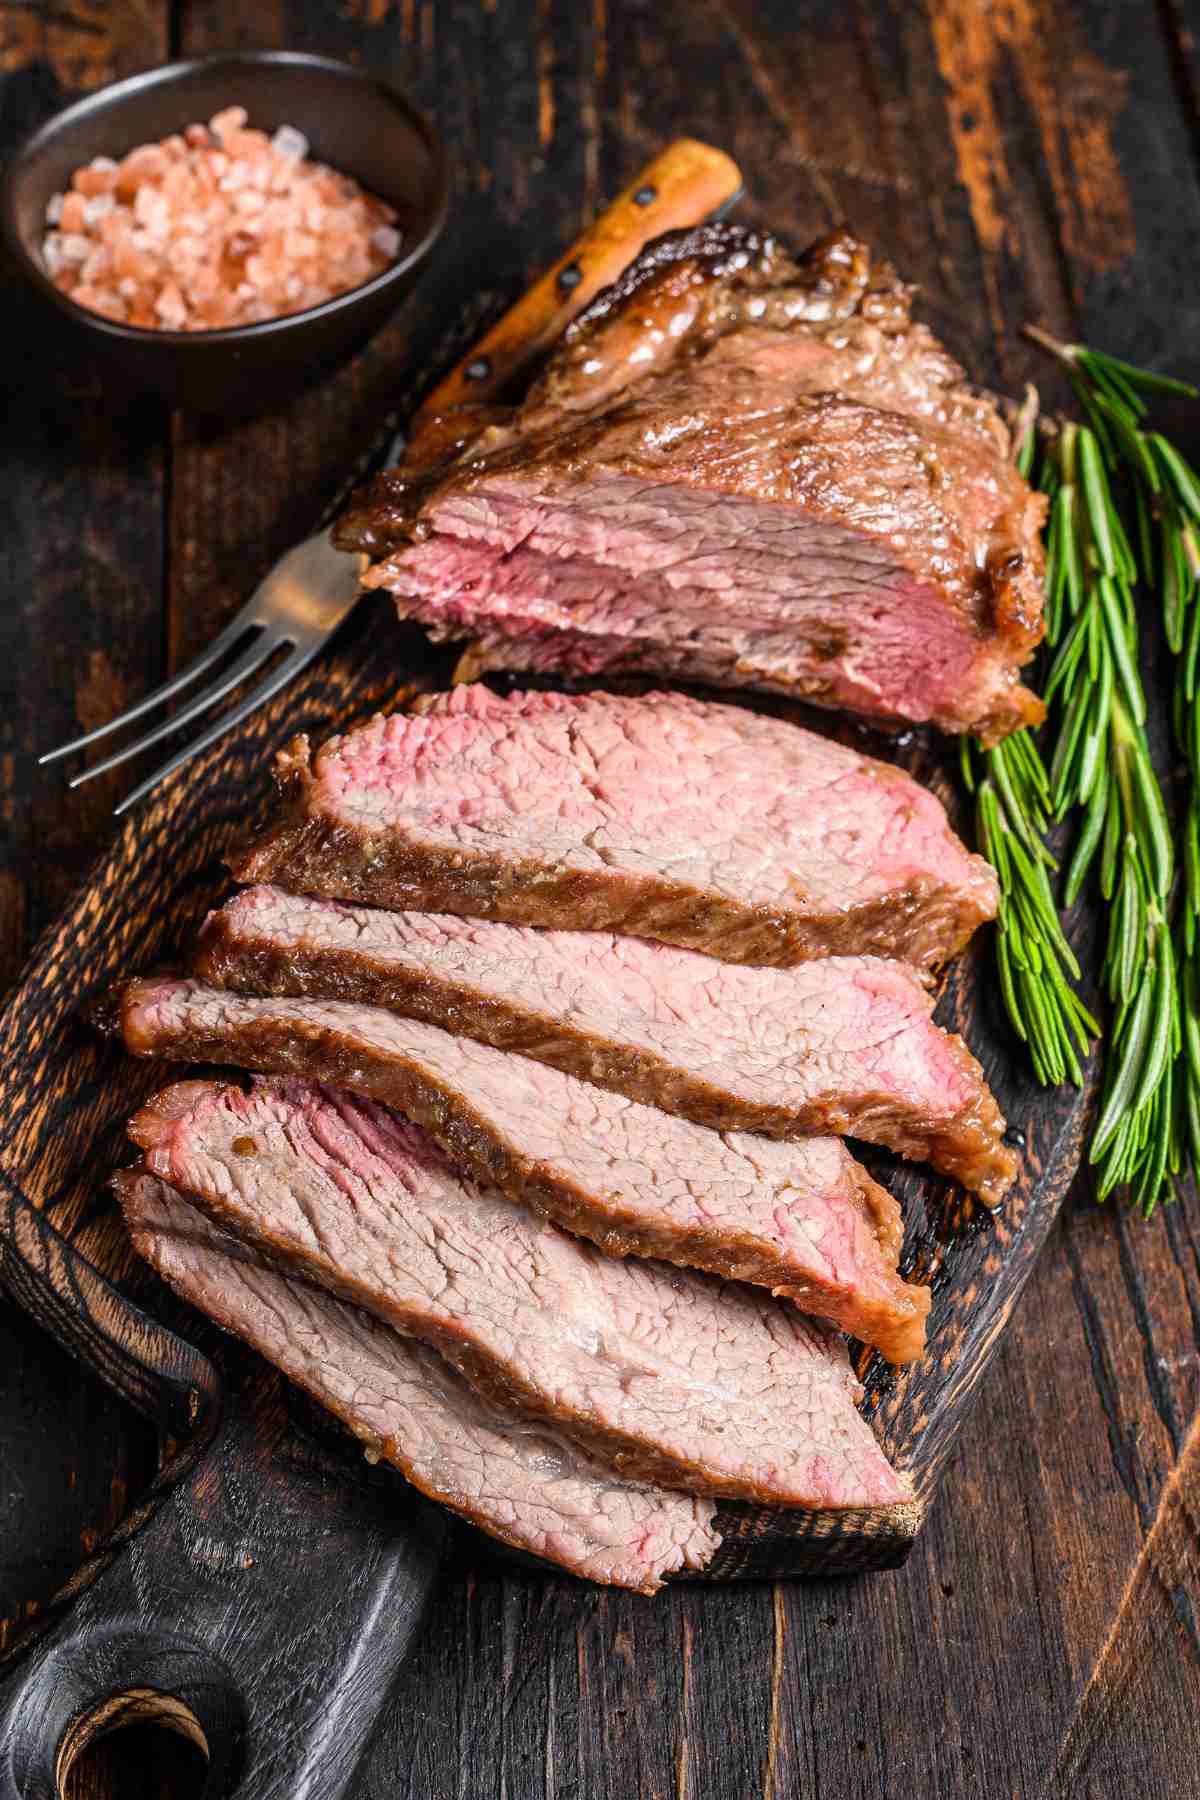 What’s the key to achieving the perfect tri-tip? It’s all about getting the right internal temperature! Keep reading to learn everything you need to know about cooking this tasty beef cut to the best temperature for your desired doneness.